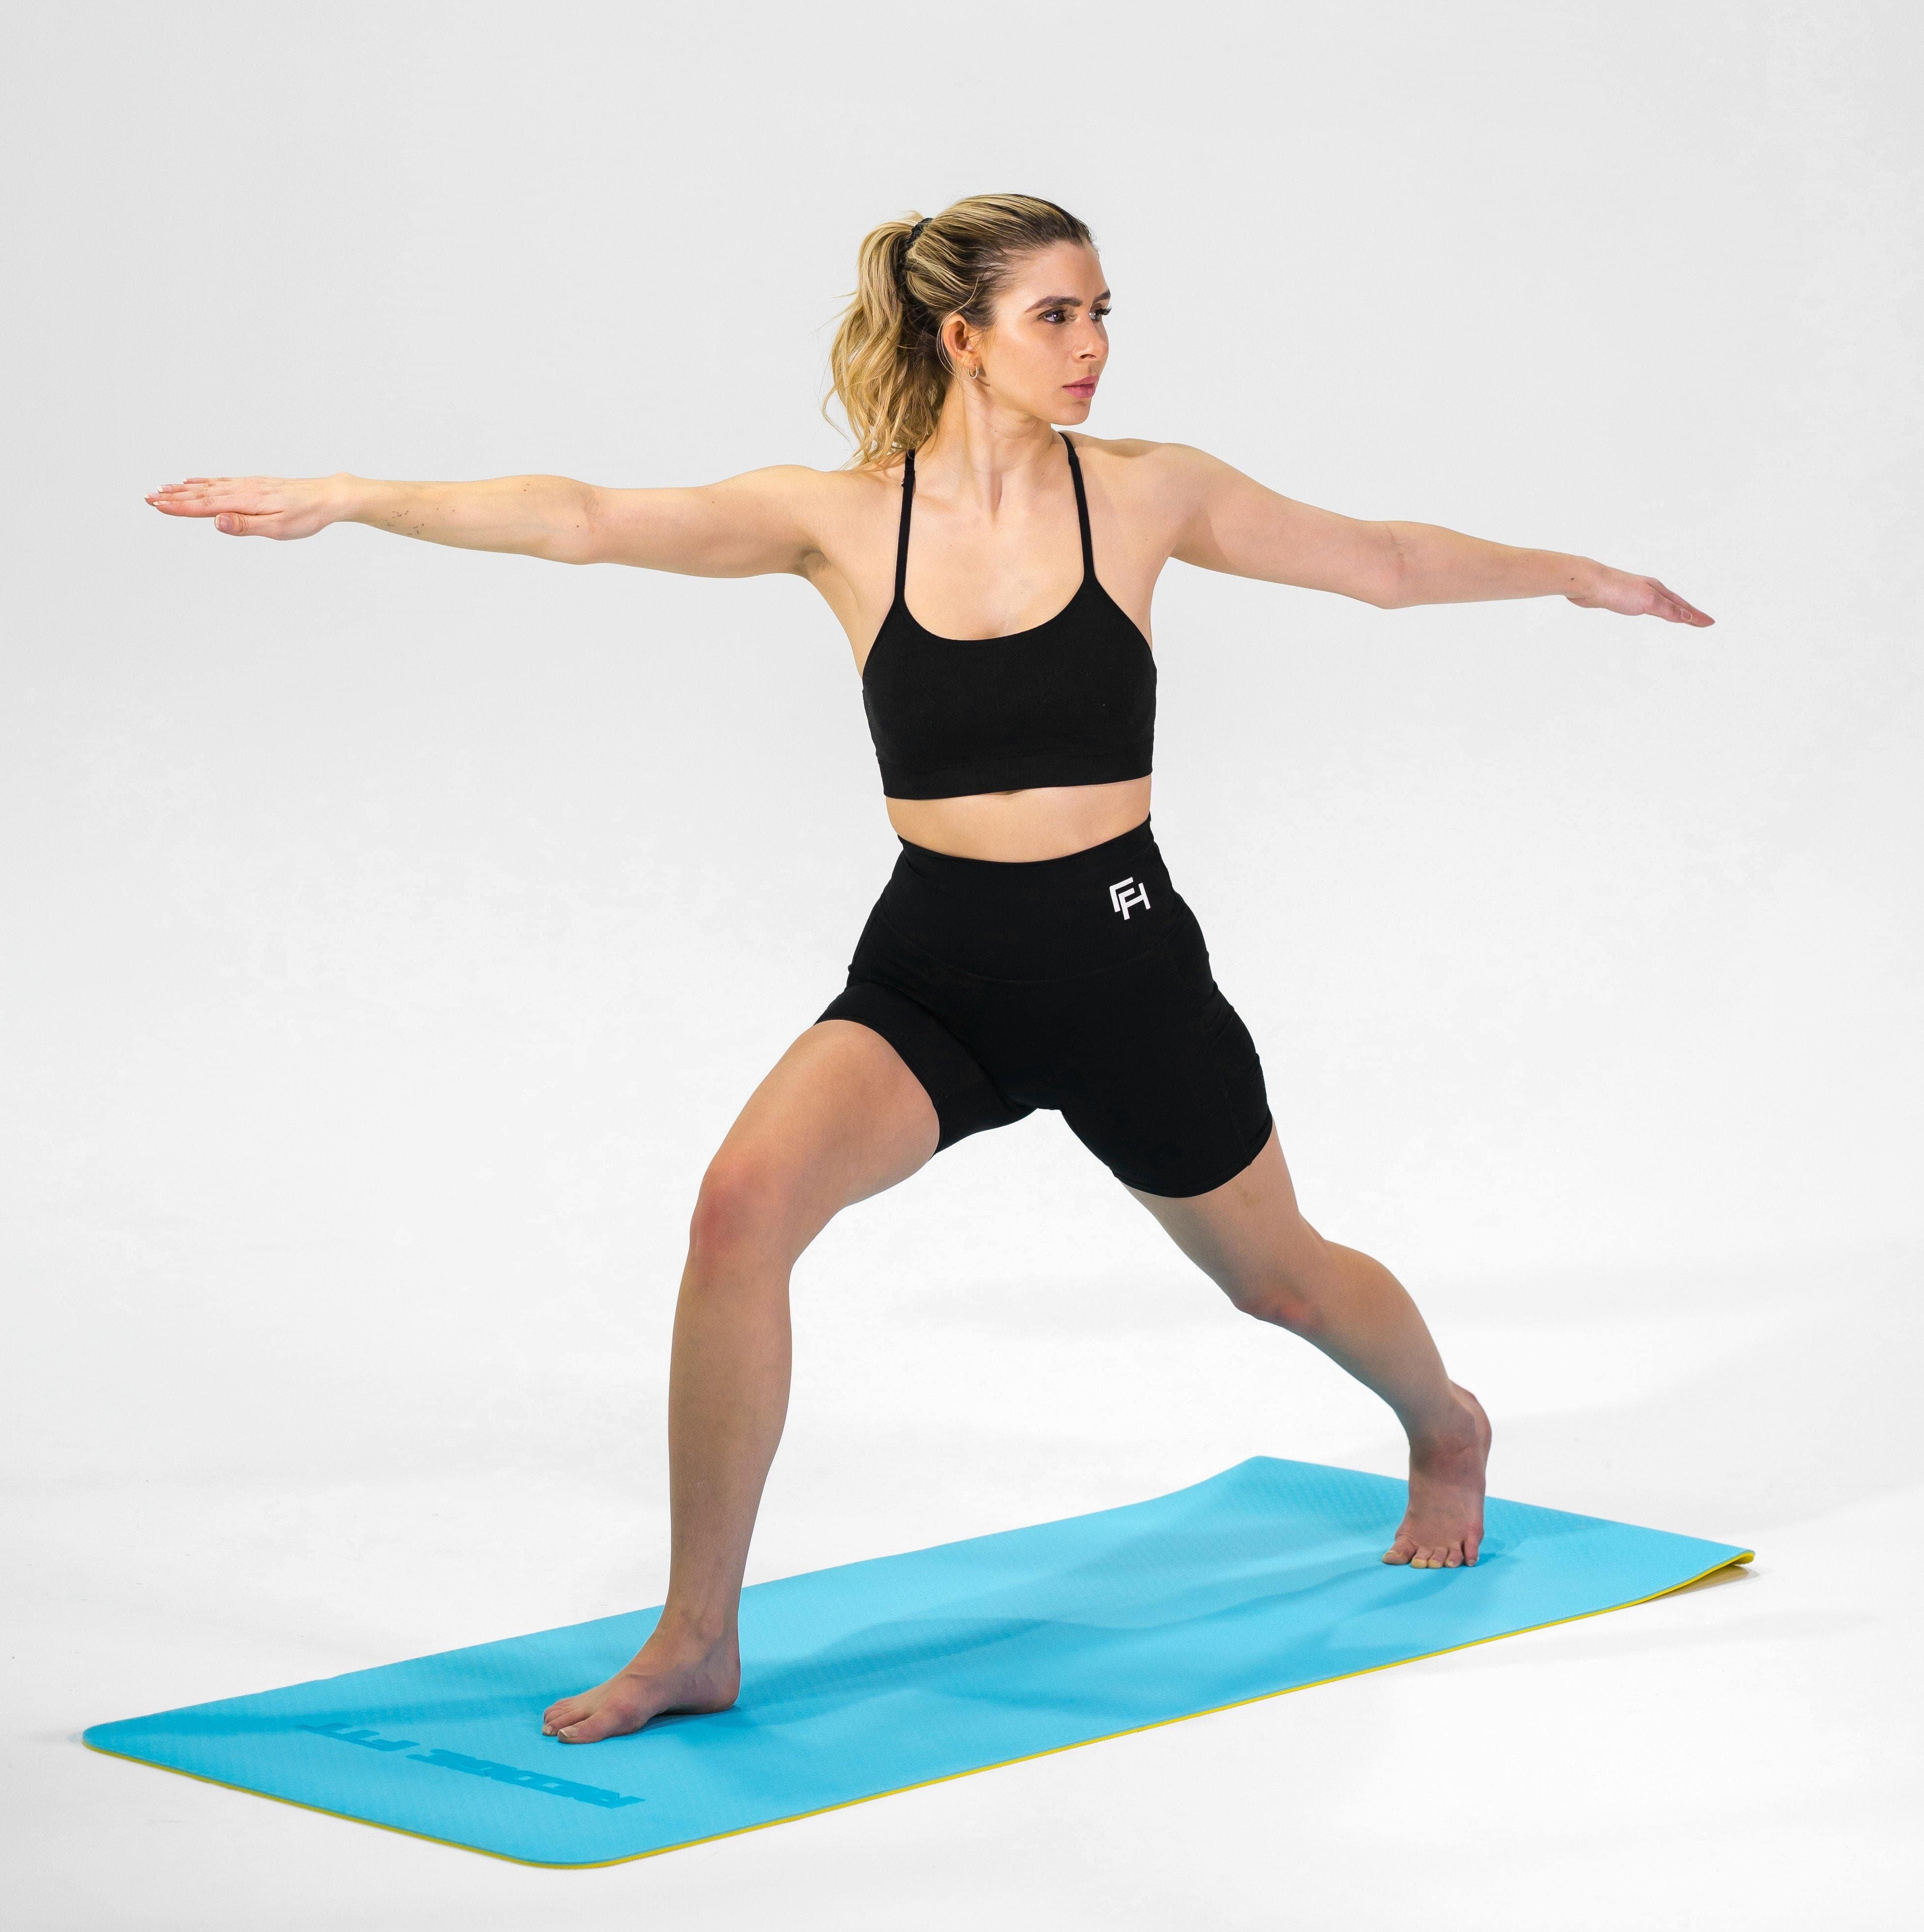 Woman modeling the Redge Fit Double Sided Workout Mat Available at https://www.getredge.com/products/redge-double-sided-workout-mat